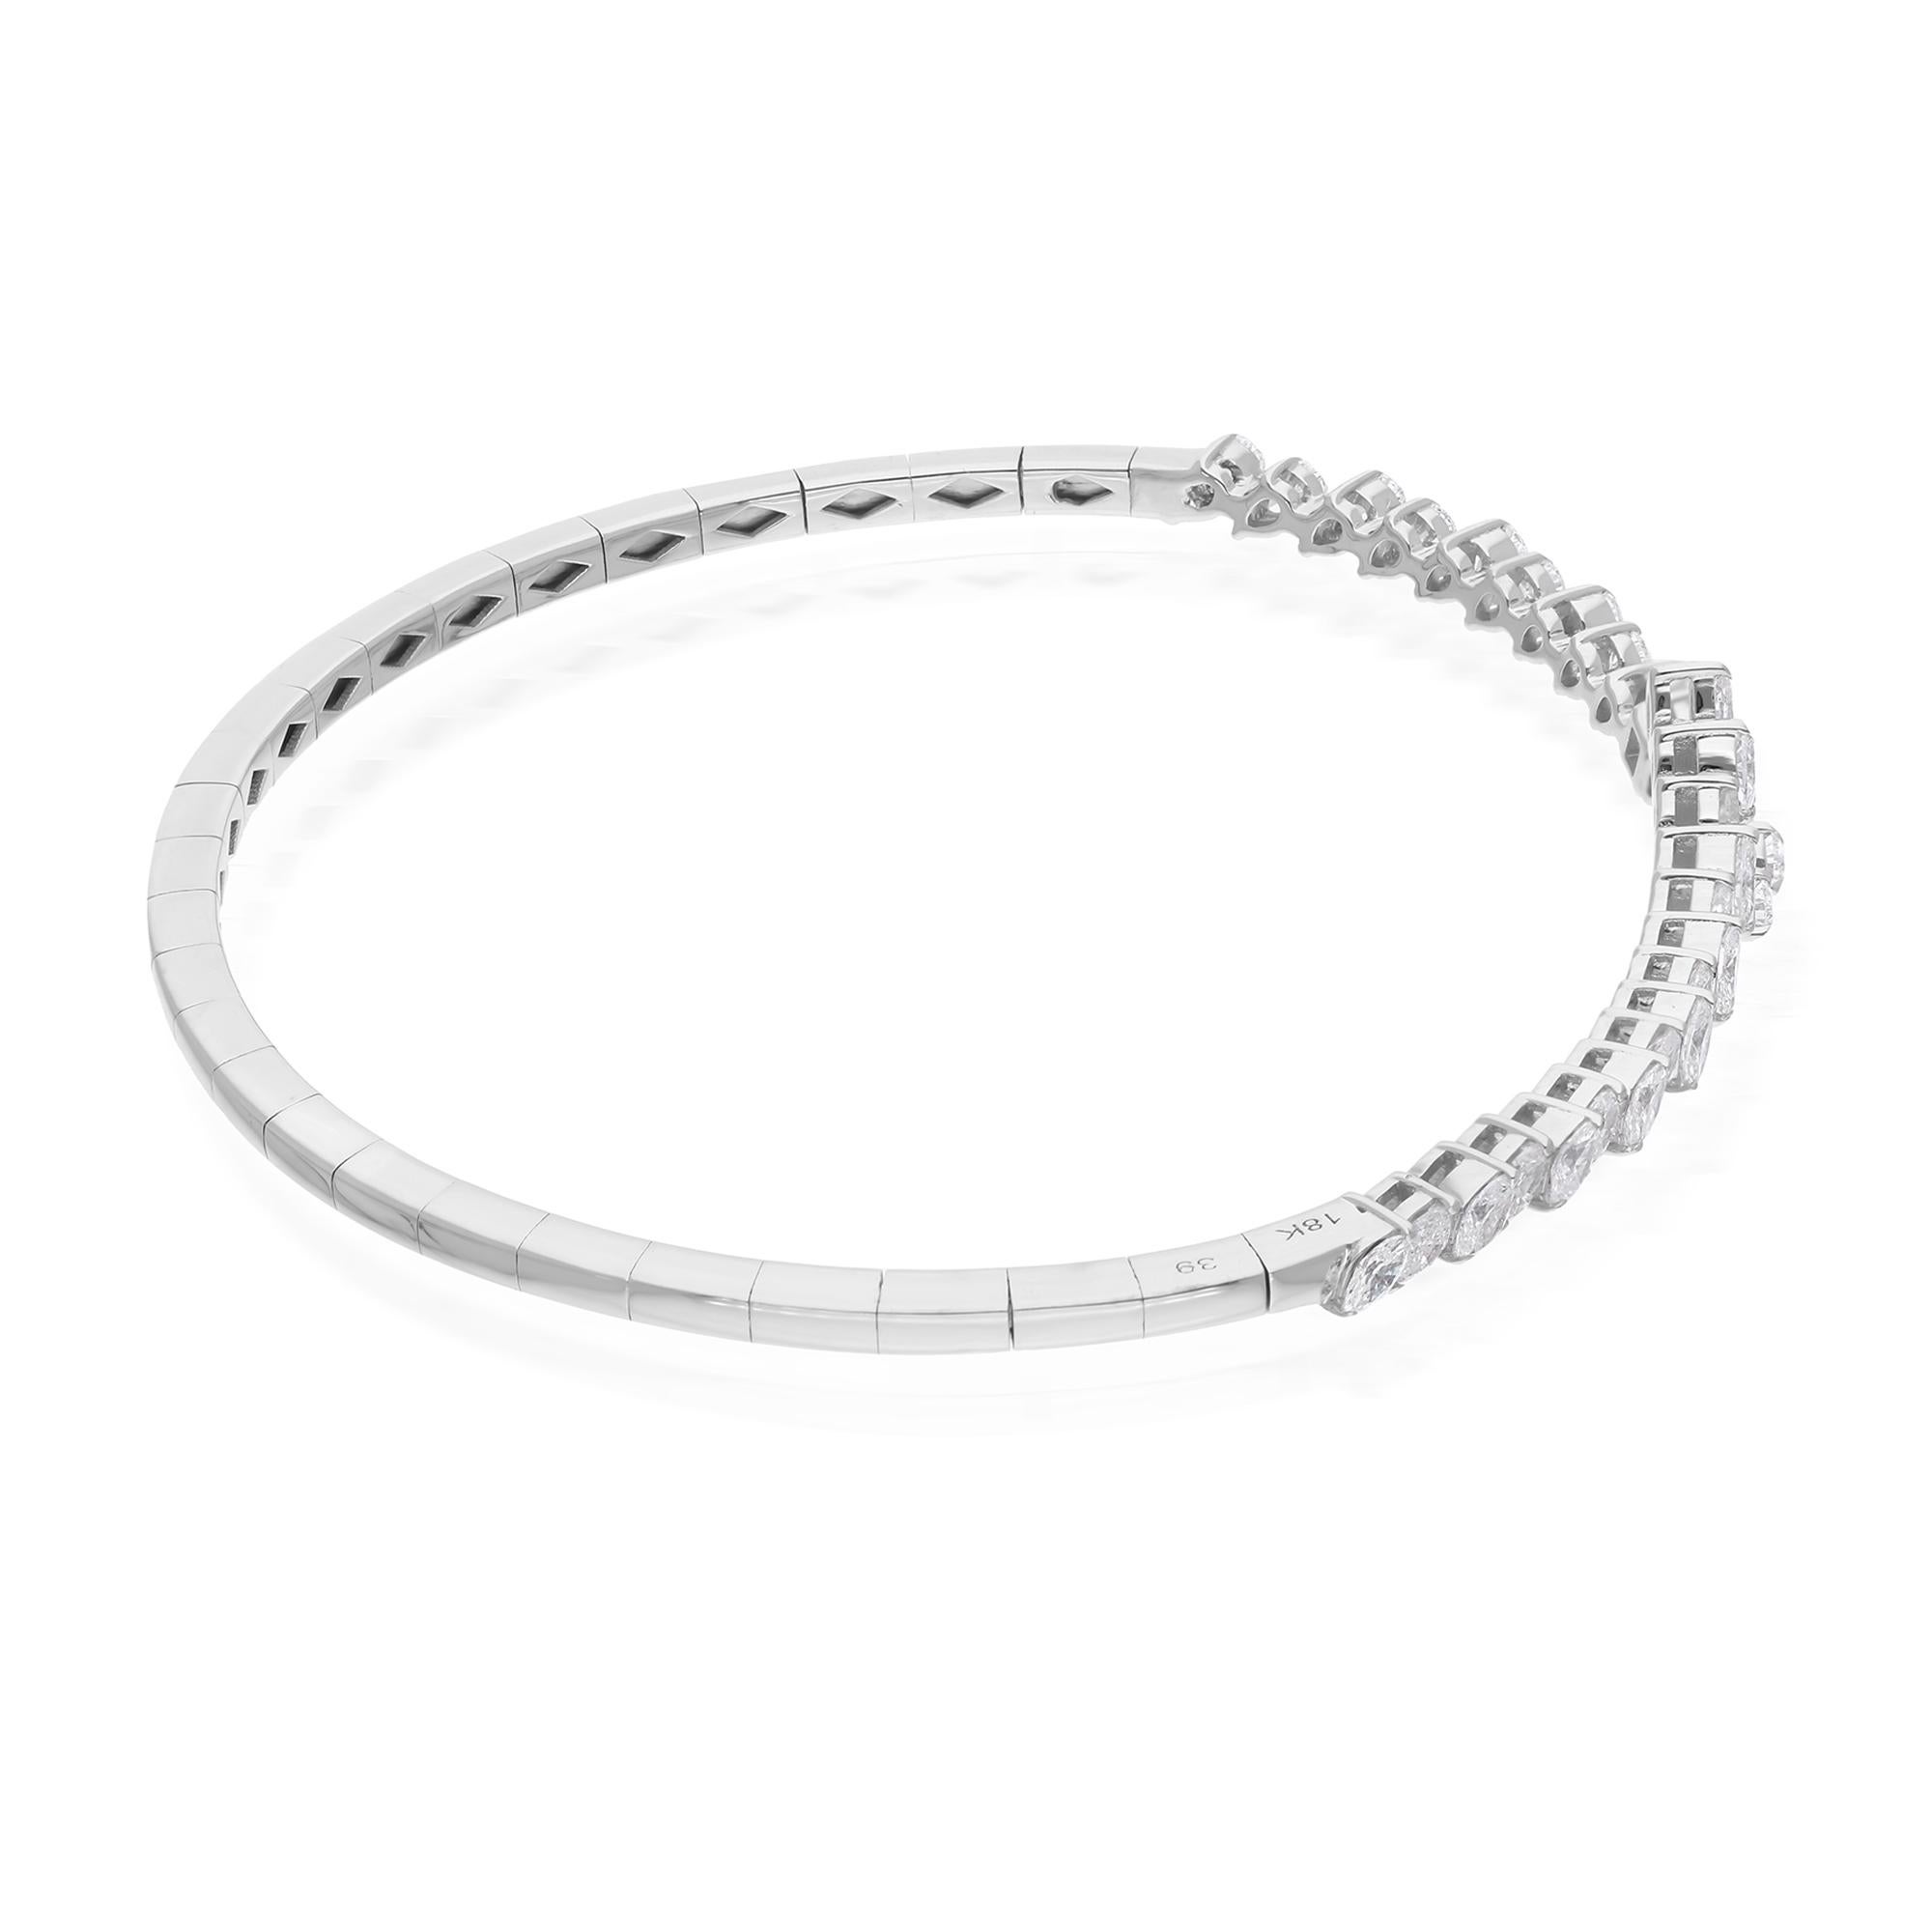 The enchanting diamonds are carefully set within the sleek contours of the cuff bangle, creating a striking contrast against the lustrous backdrop of 14 Karat White Gold. This precious metal not only provides a radiant sheen but also serves as a